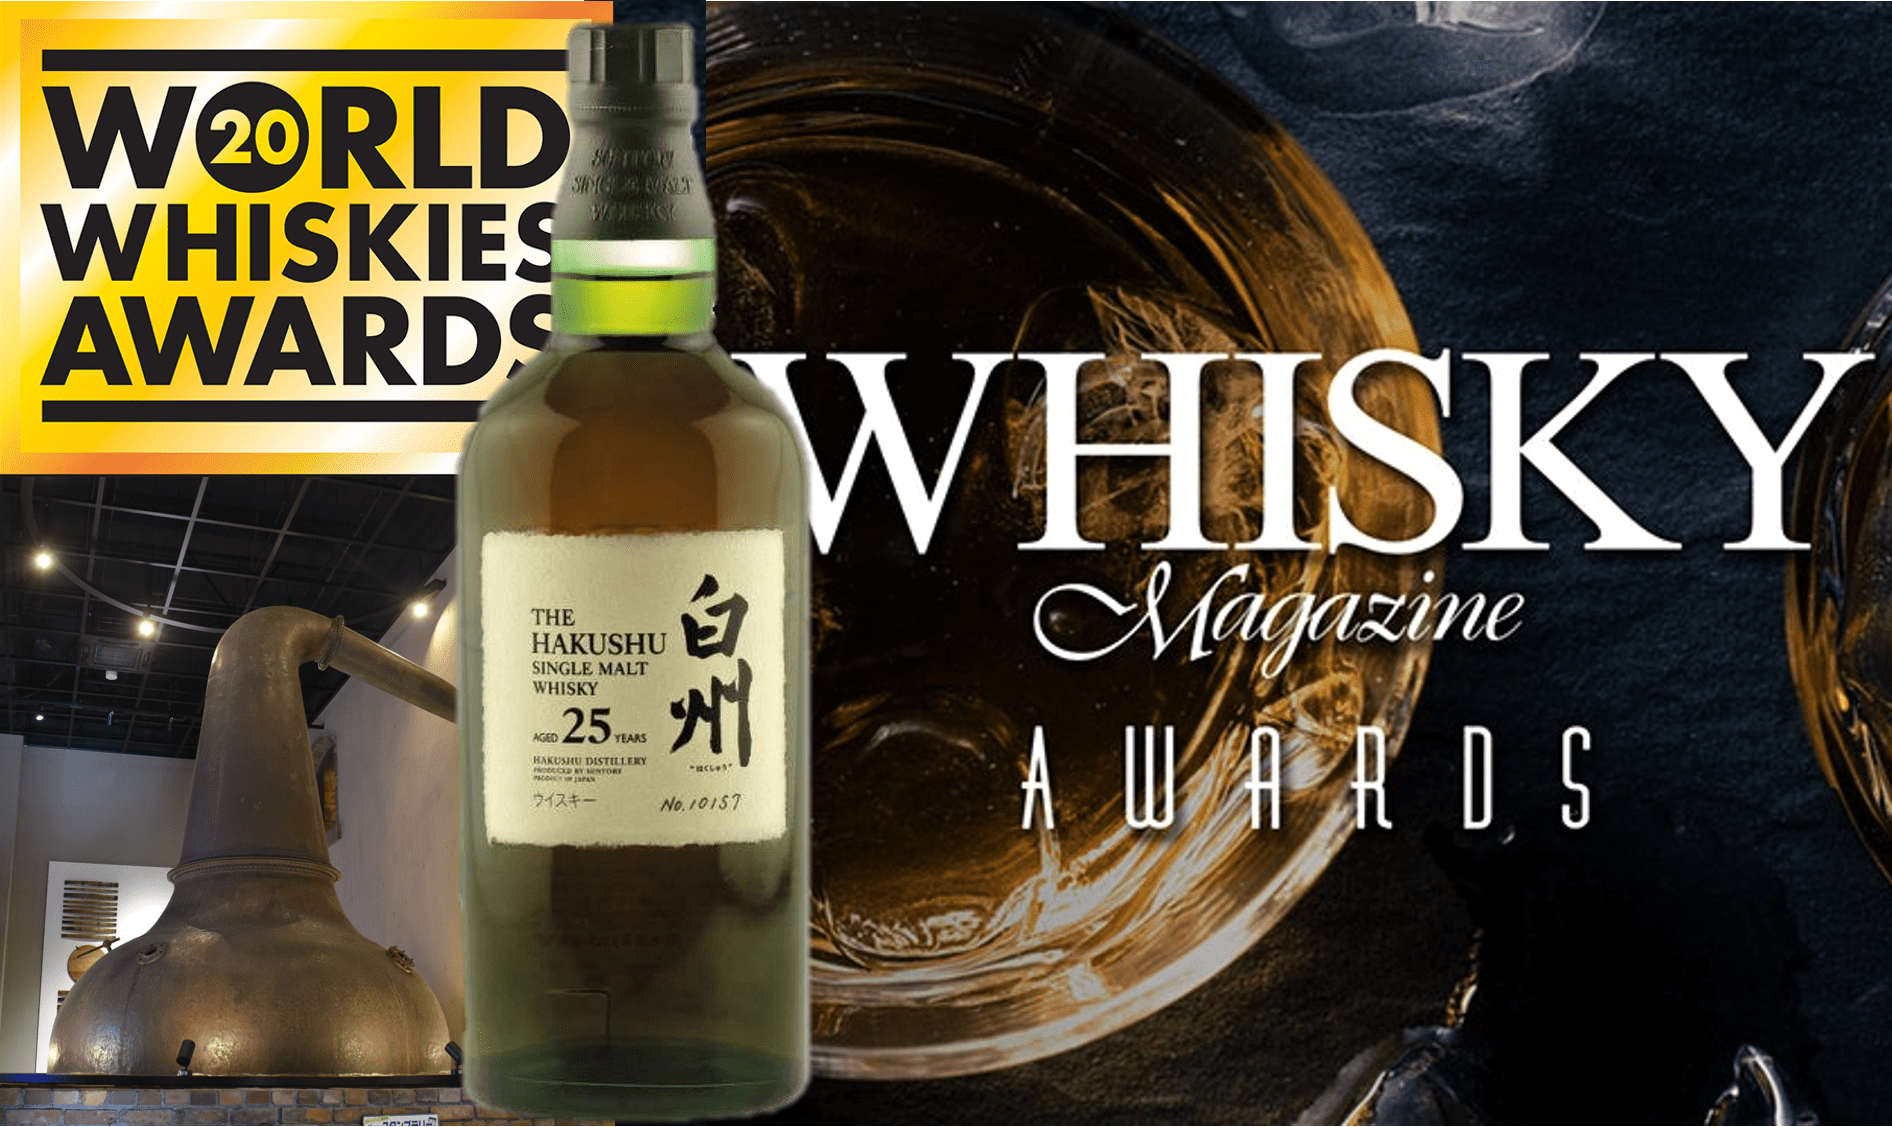 The 2020 World Whisky Award ceremony just happened…online in London